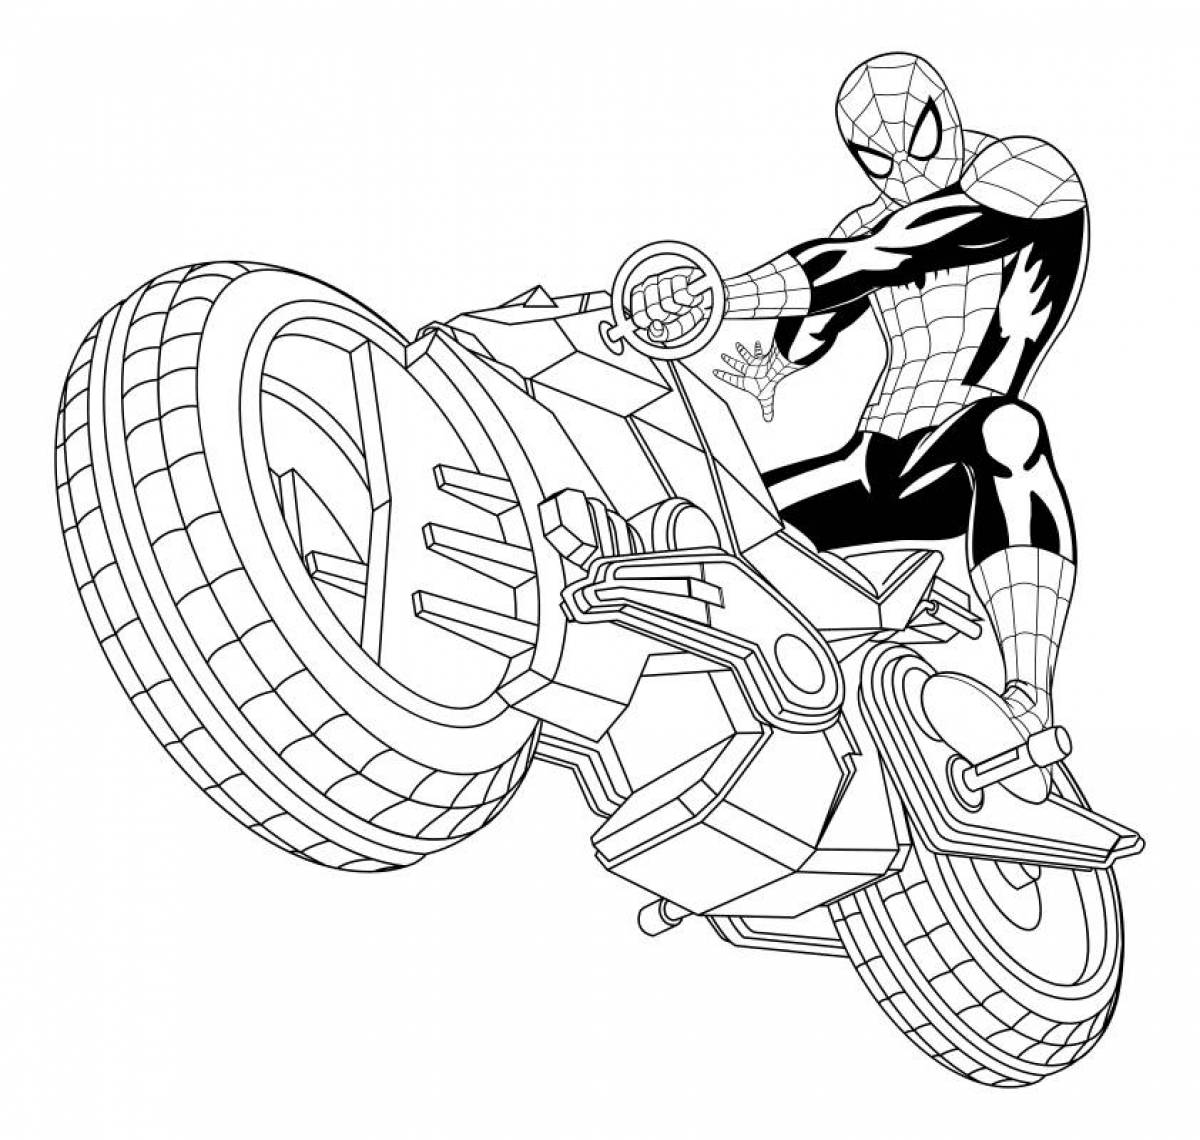 Spider-Man amazing coloring pages